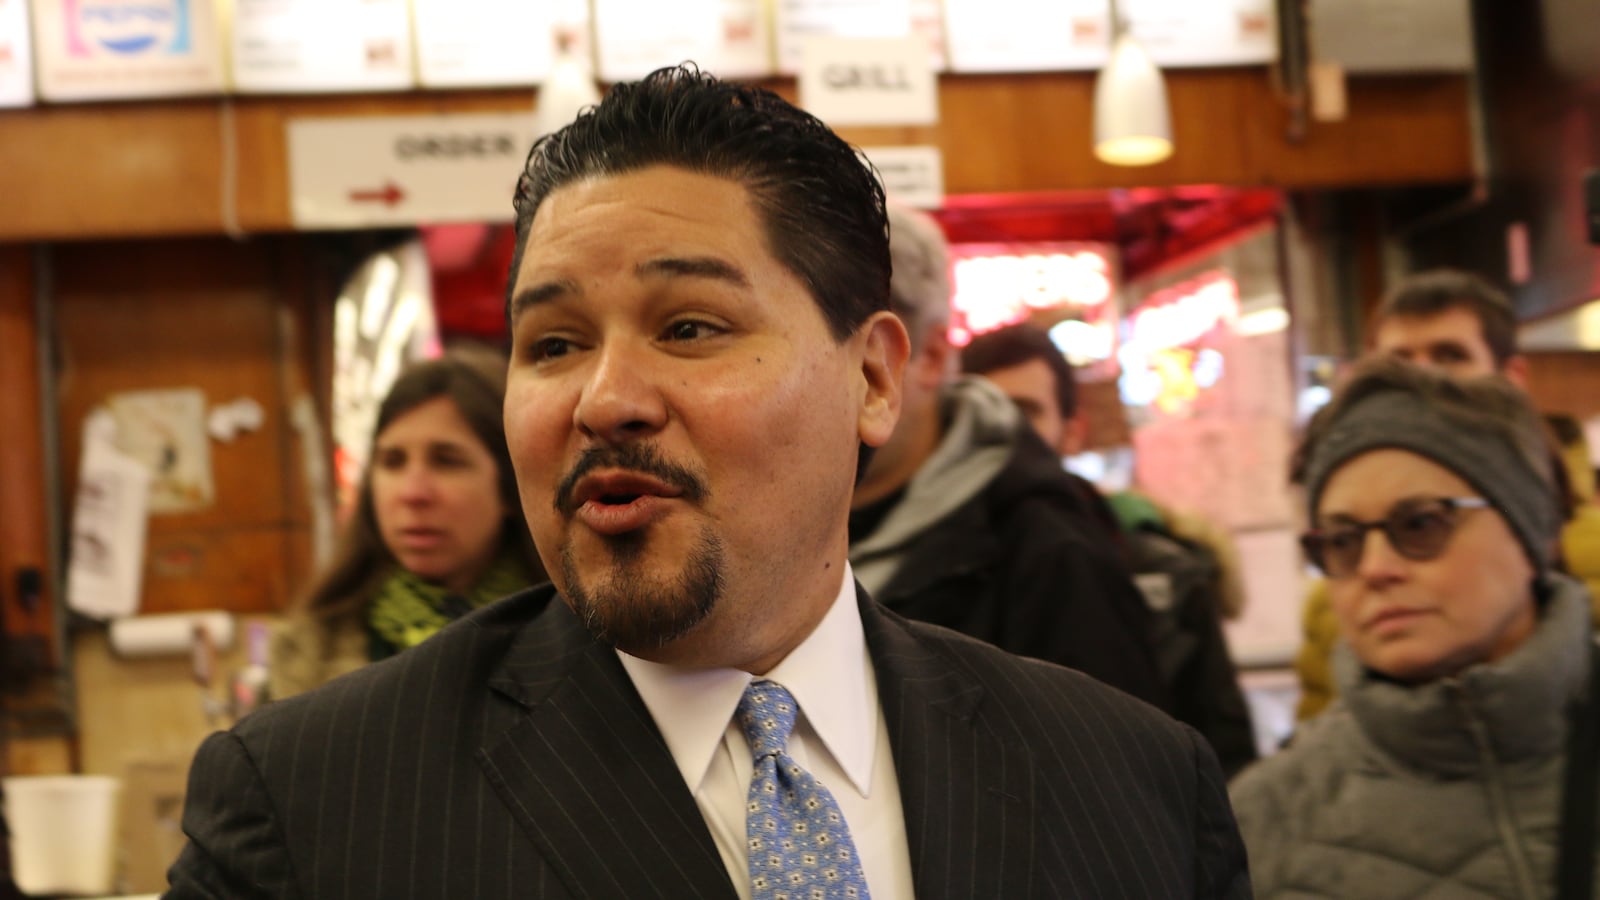 With schools closed for spring break, Richard Carranza joined Mayor Bill de Blasio and First Lady Chirlane McCray for lunch at Katz's Deli on his first day as chancellor.